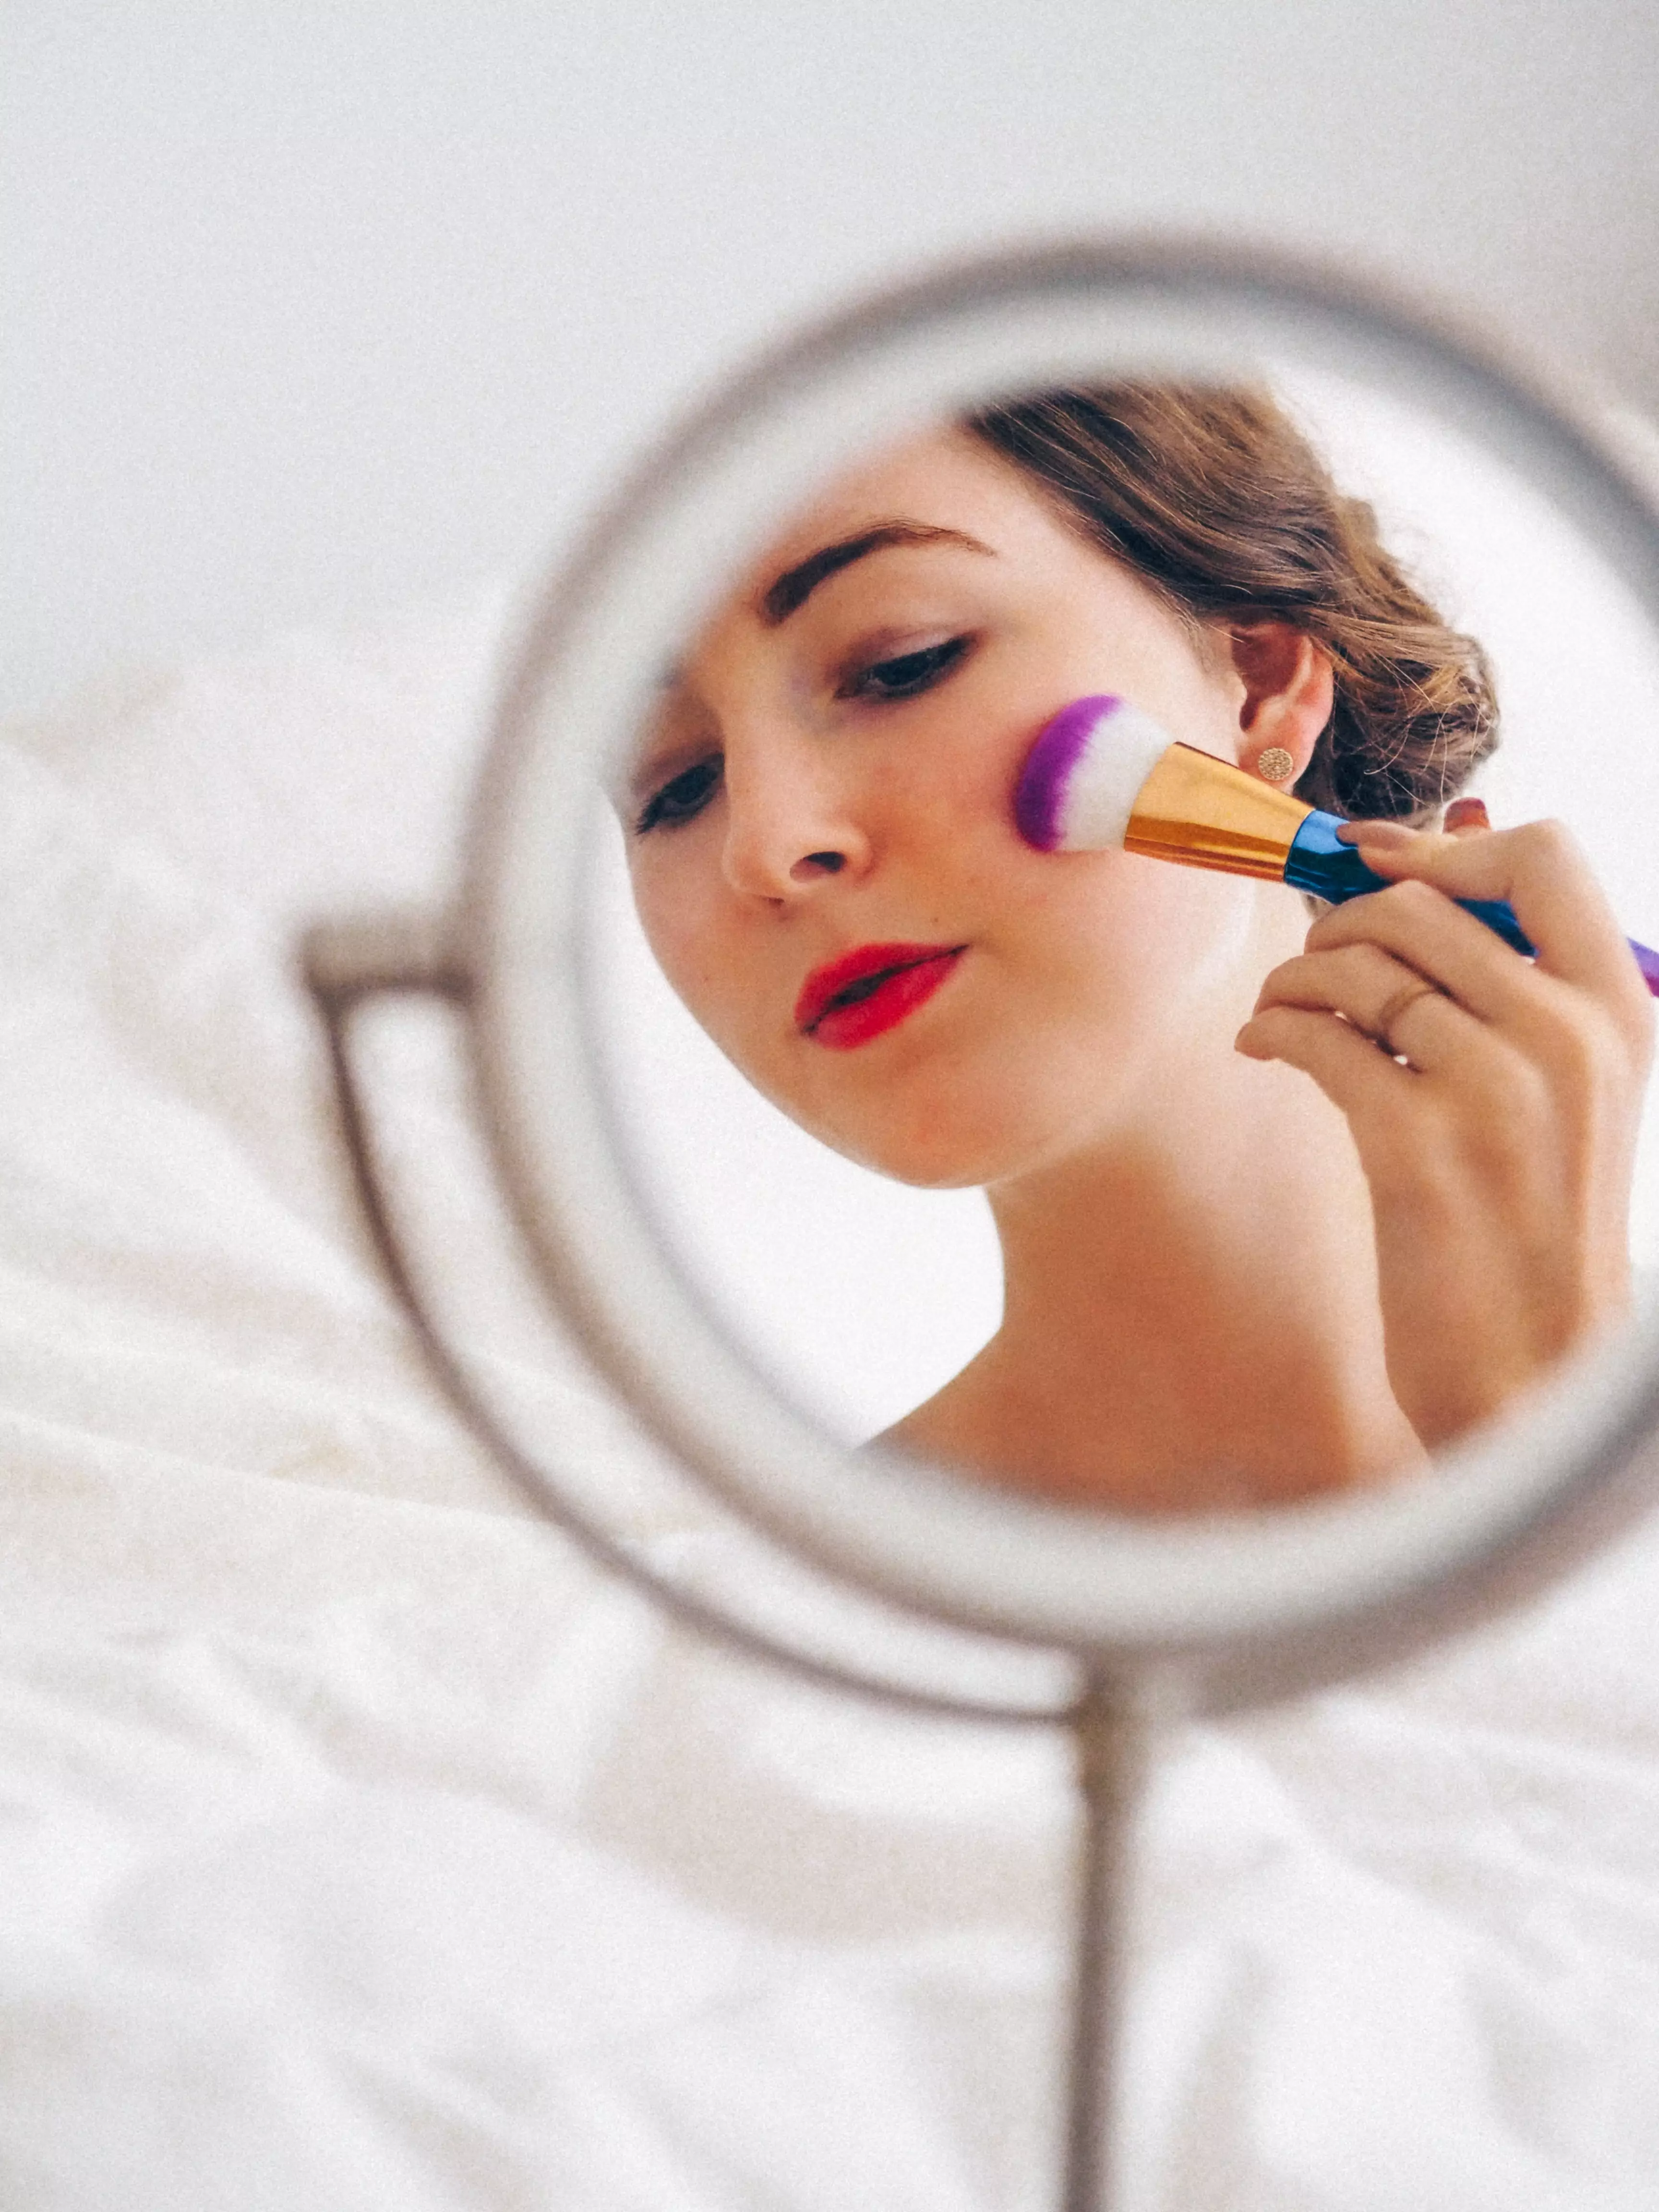 A new study has claimed that women who wear a lot of makeup are seen to be less intelligent (